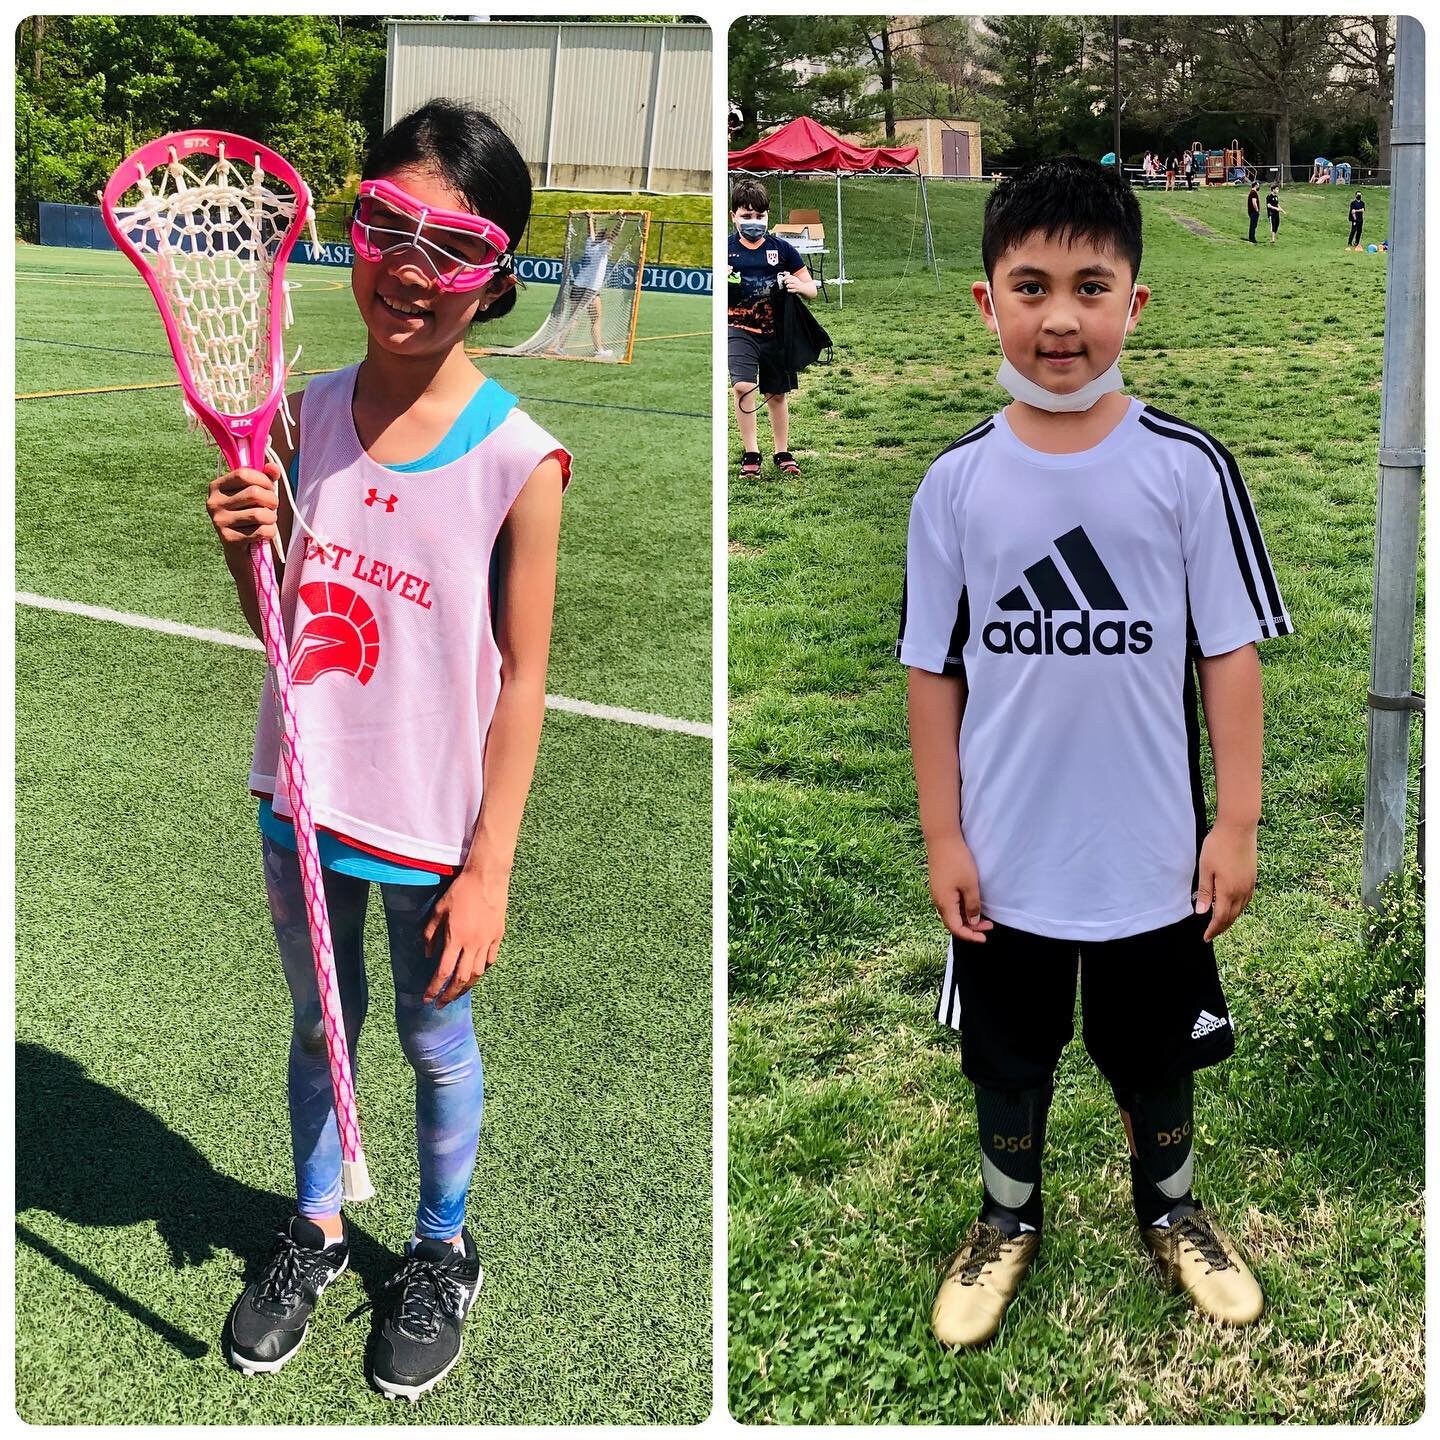 And... it&rsquo;s a wrap! Spring lacrosse and soccer in the books for these 2! #LacrosseMom
 #SoccerMom